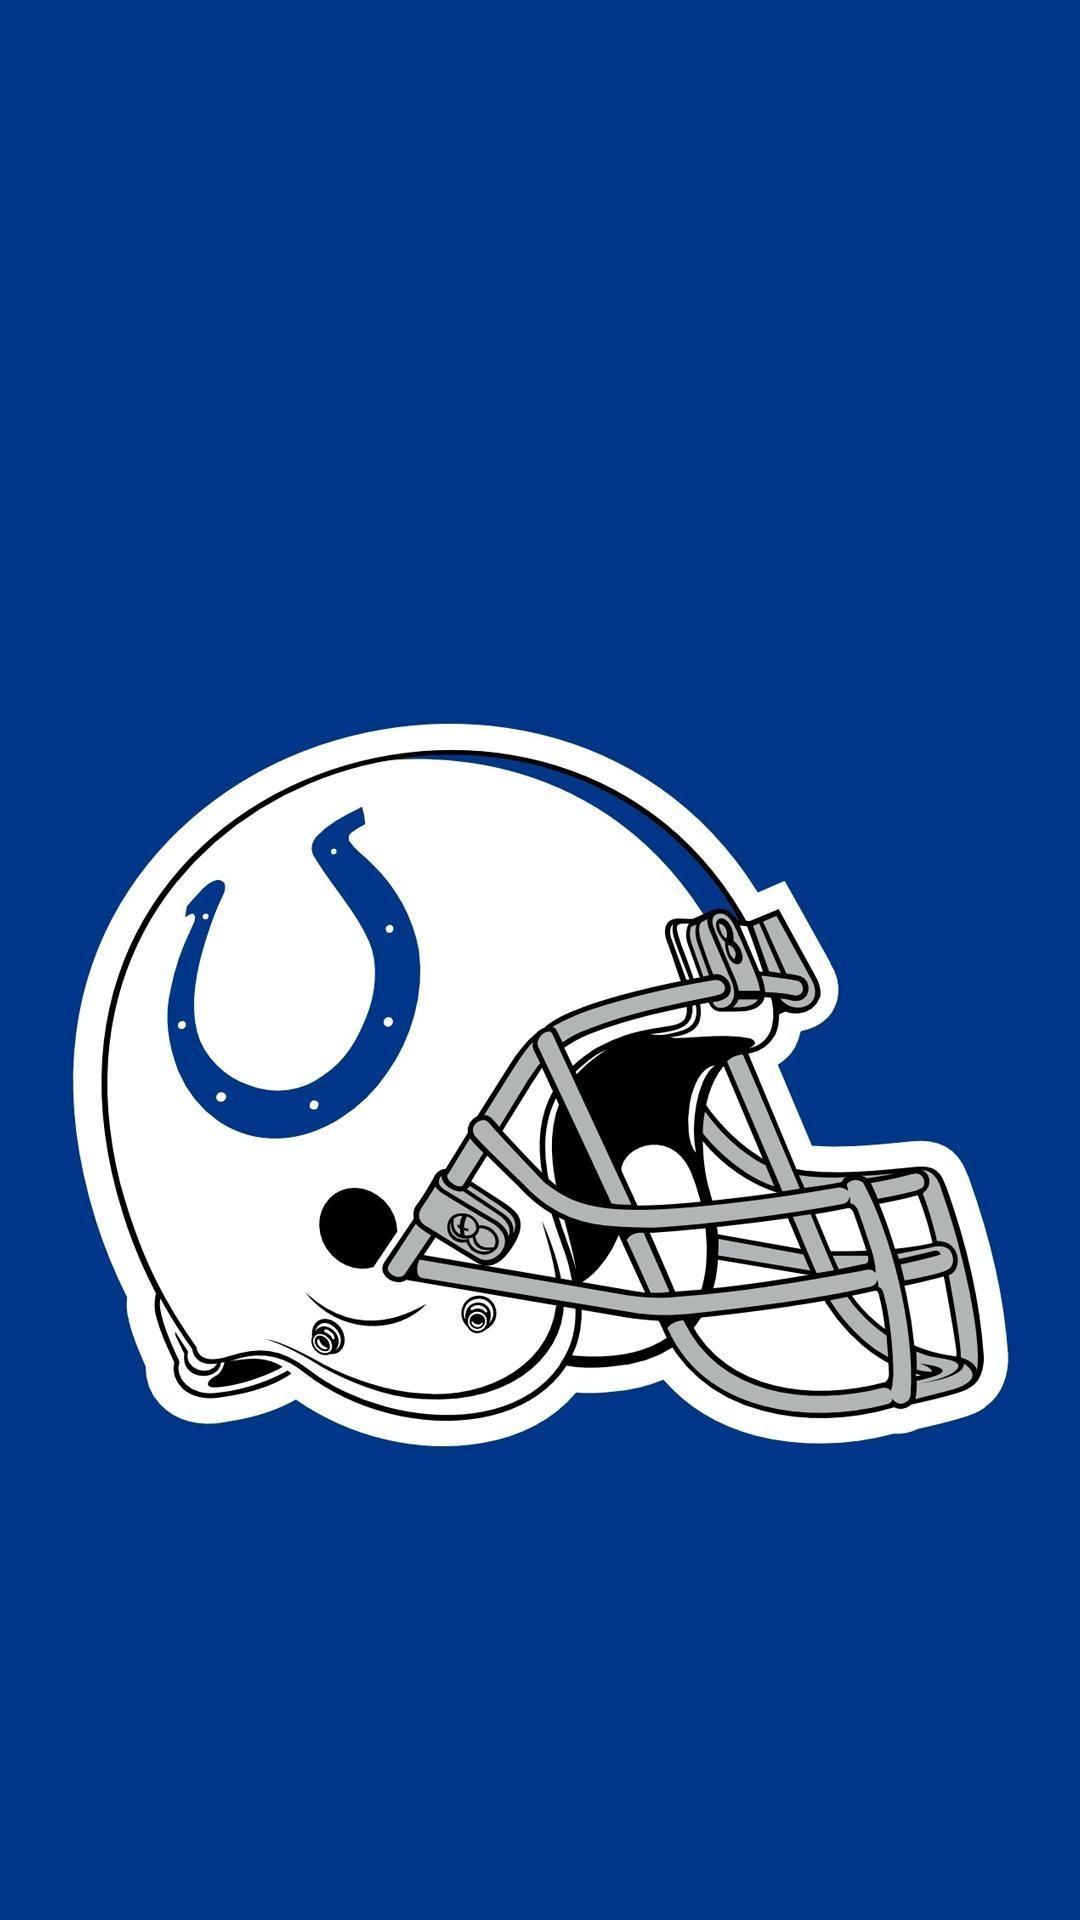 Colts Wallpaper (the best image in 2018)